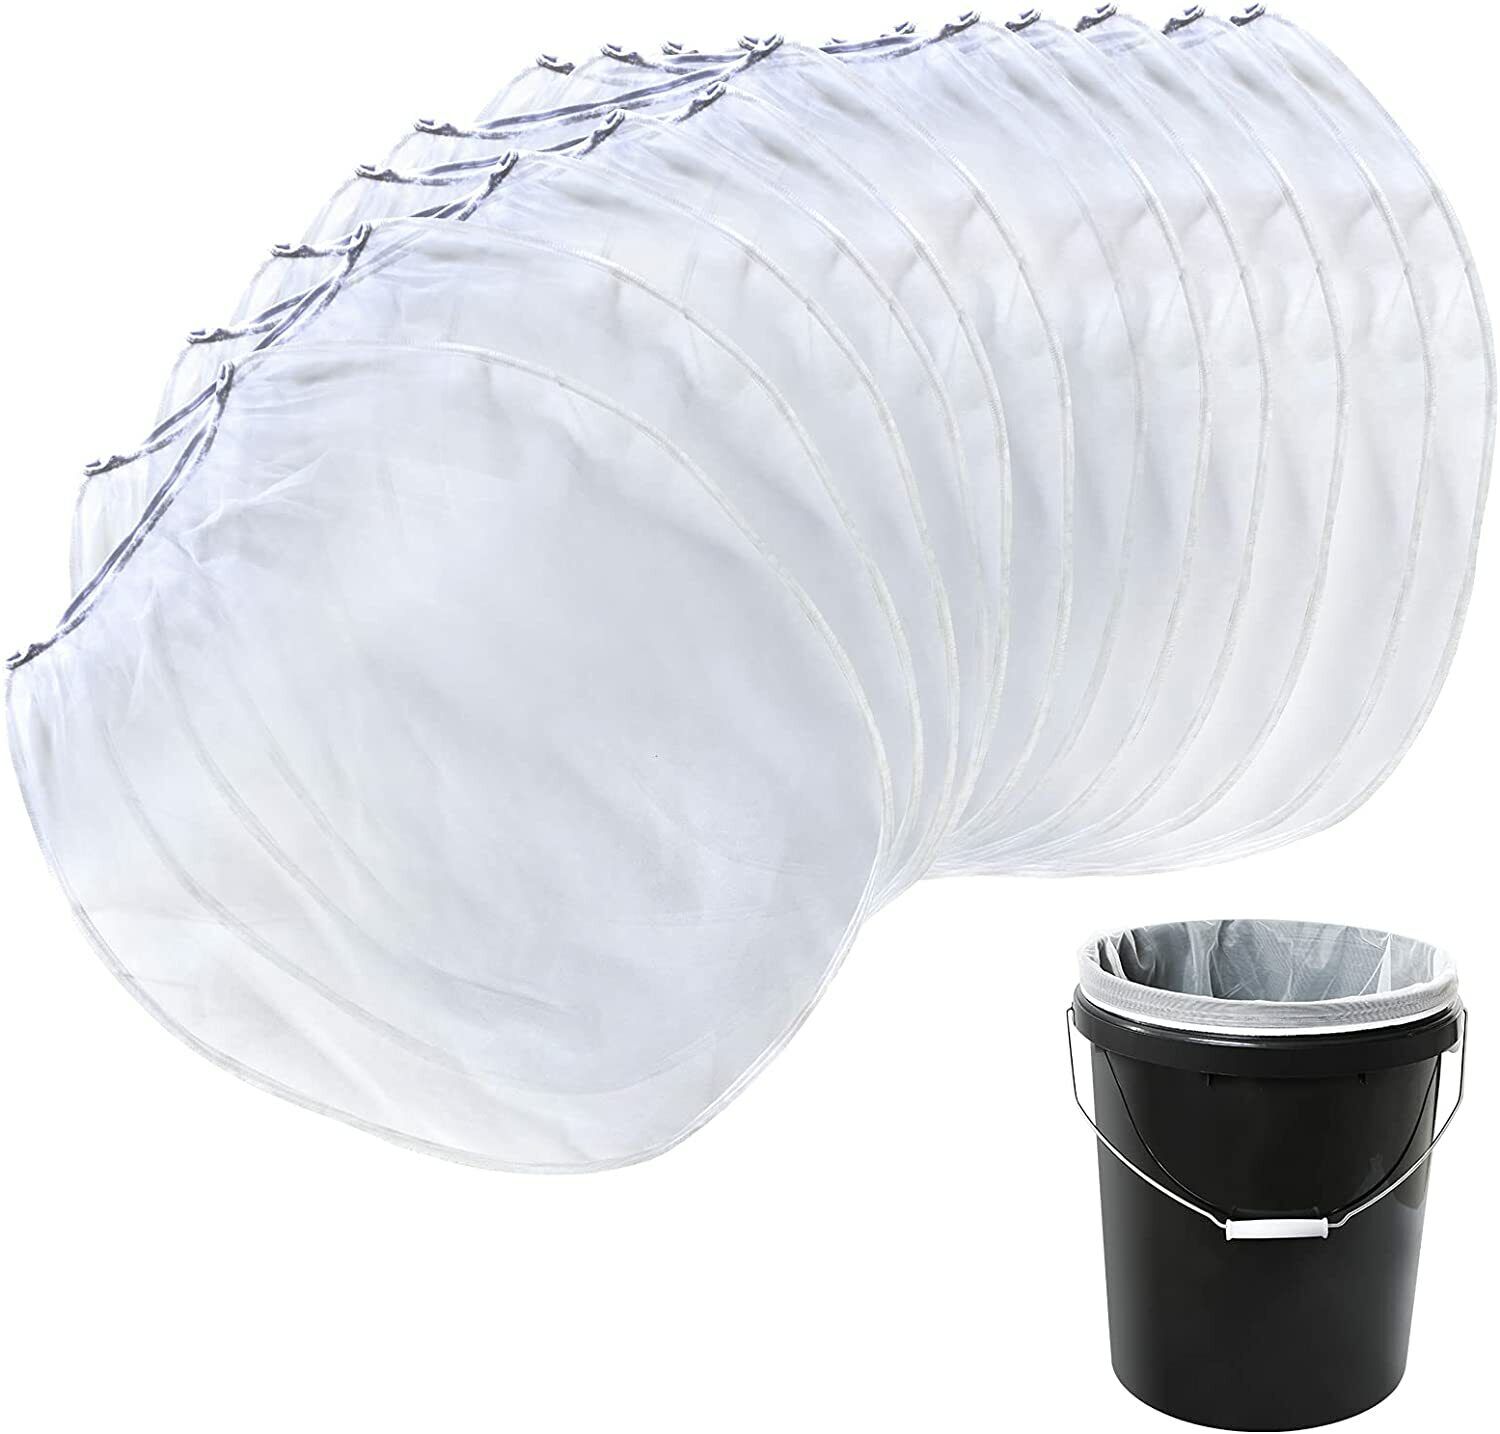 30 Pieces Paint Strainer Bags Include 30 Pieces 5 Gallon White Fine Mesh Filters